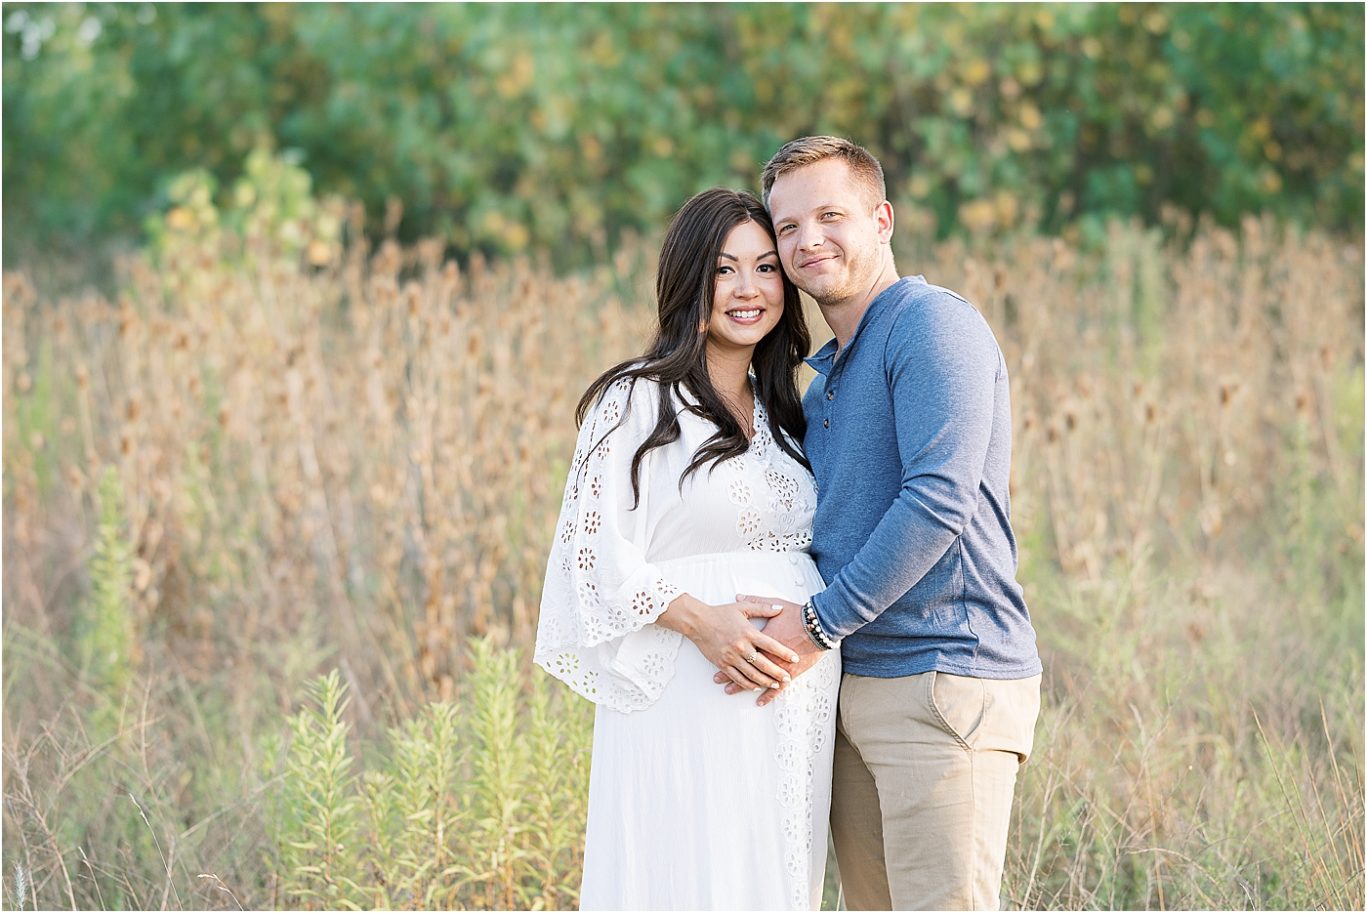 Maternity session for new parents at Flat Fork Creek Park in Fishers. Photo by Lindsay Konopa Photography.